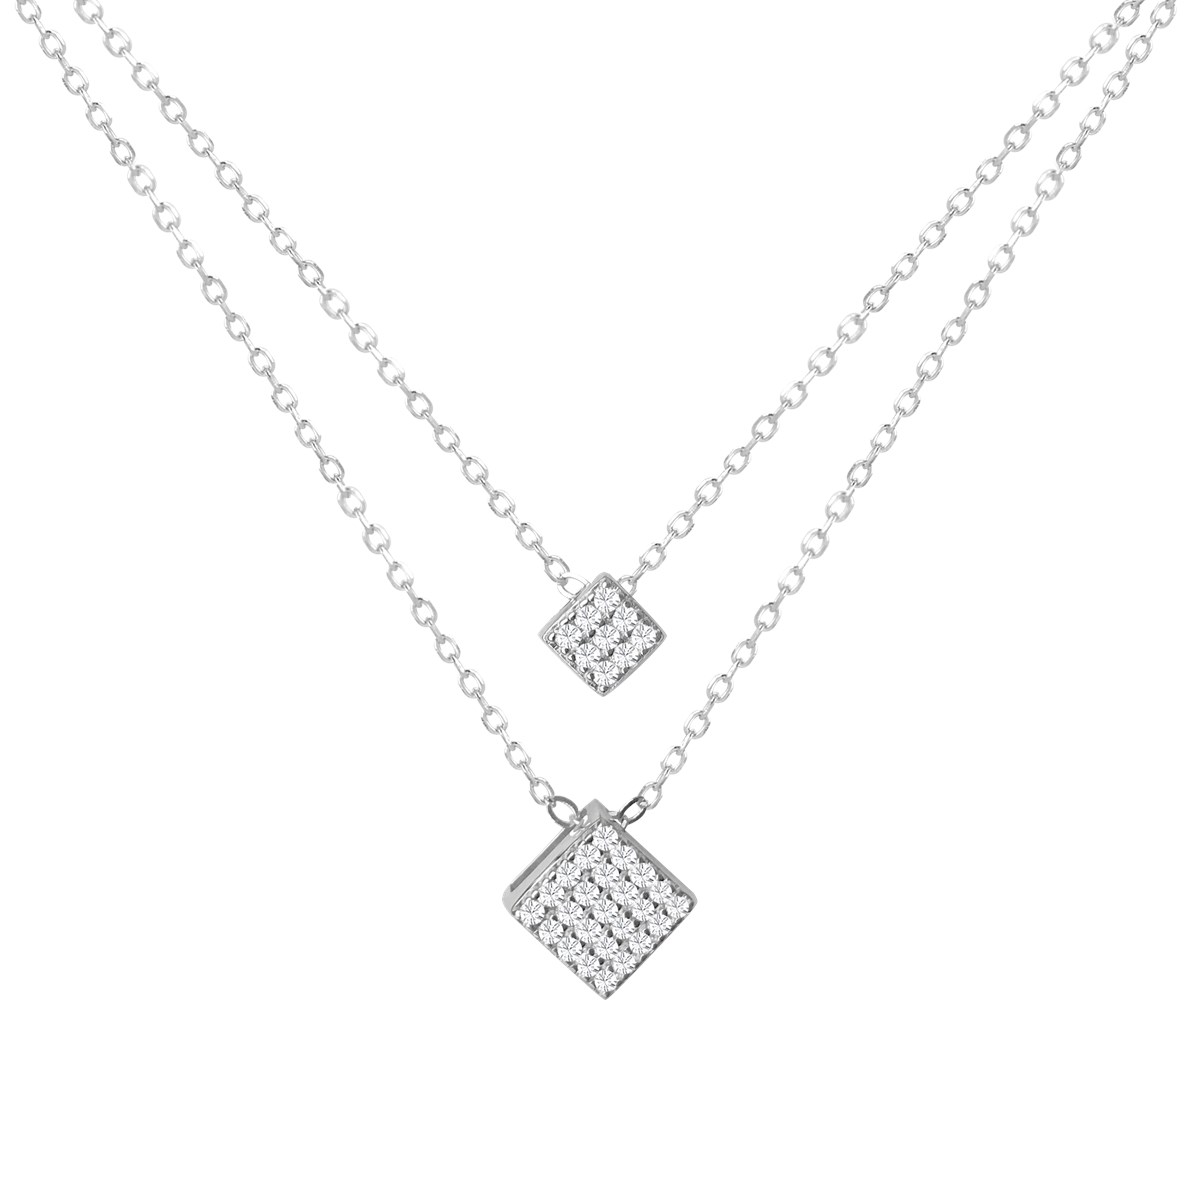 Collier argent 925 oxyde